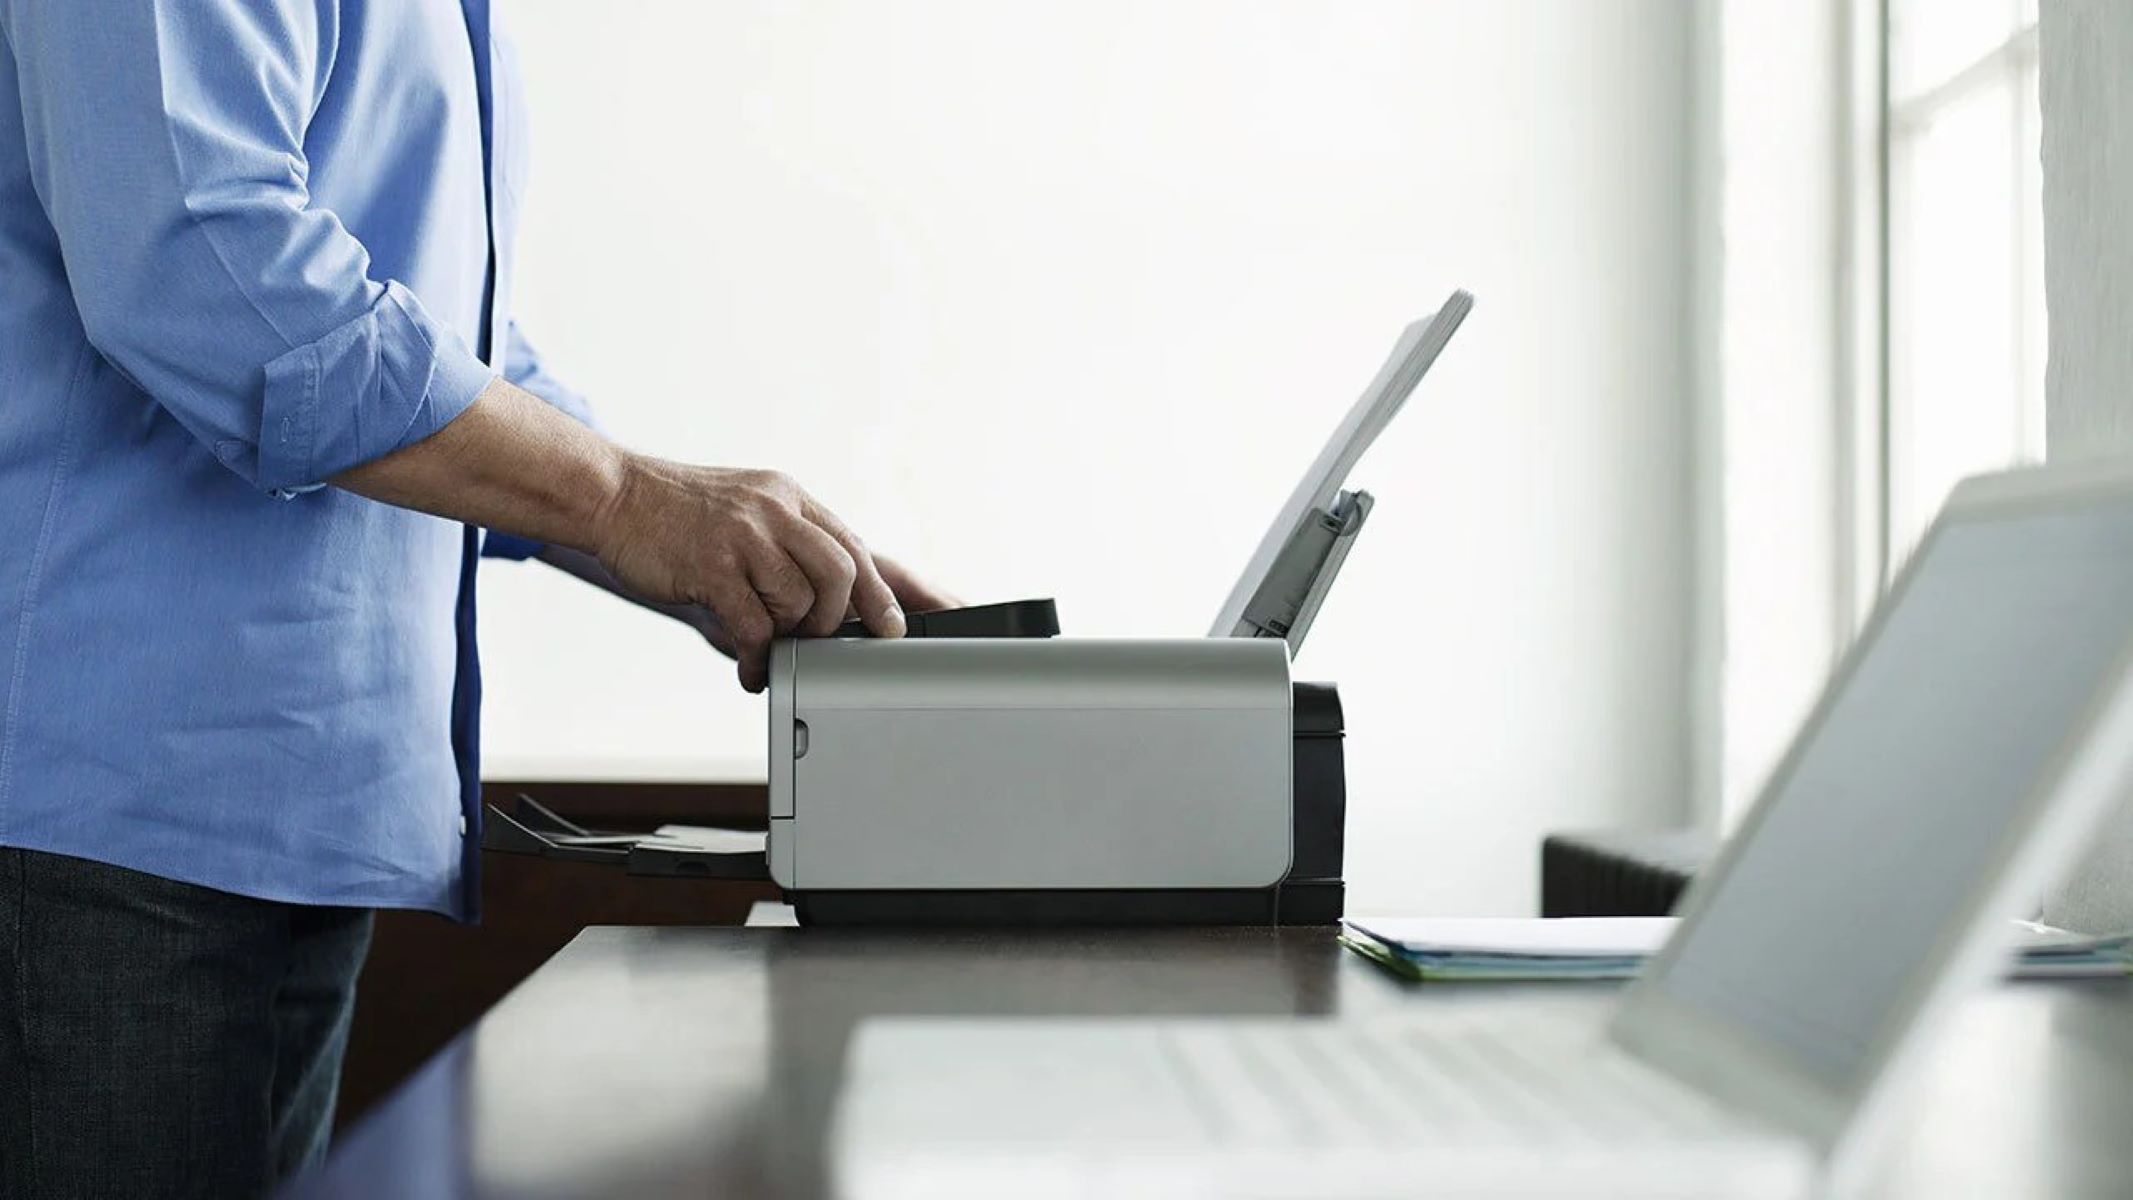 How To Install A Wireless Printer On Windows 8